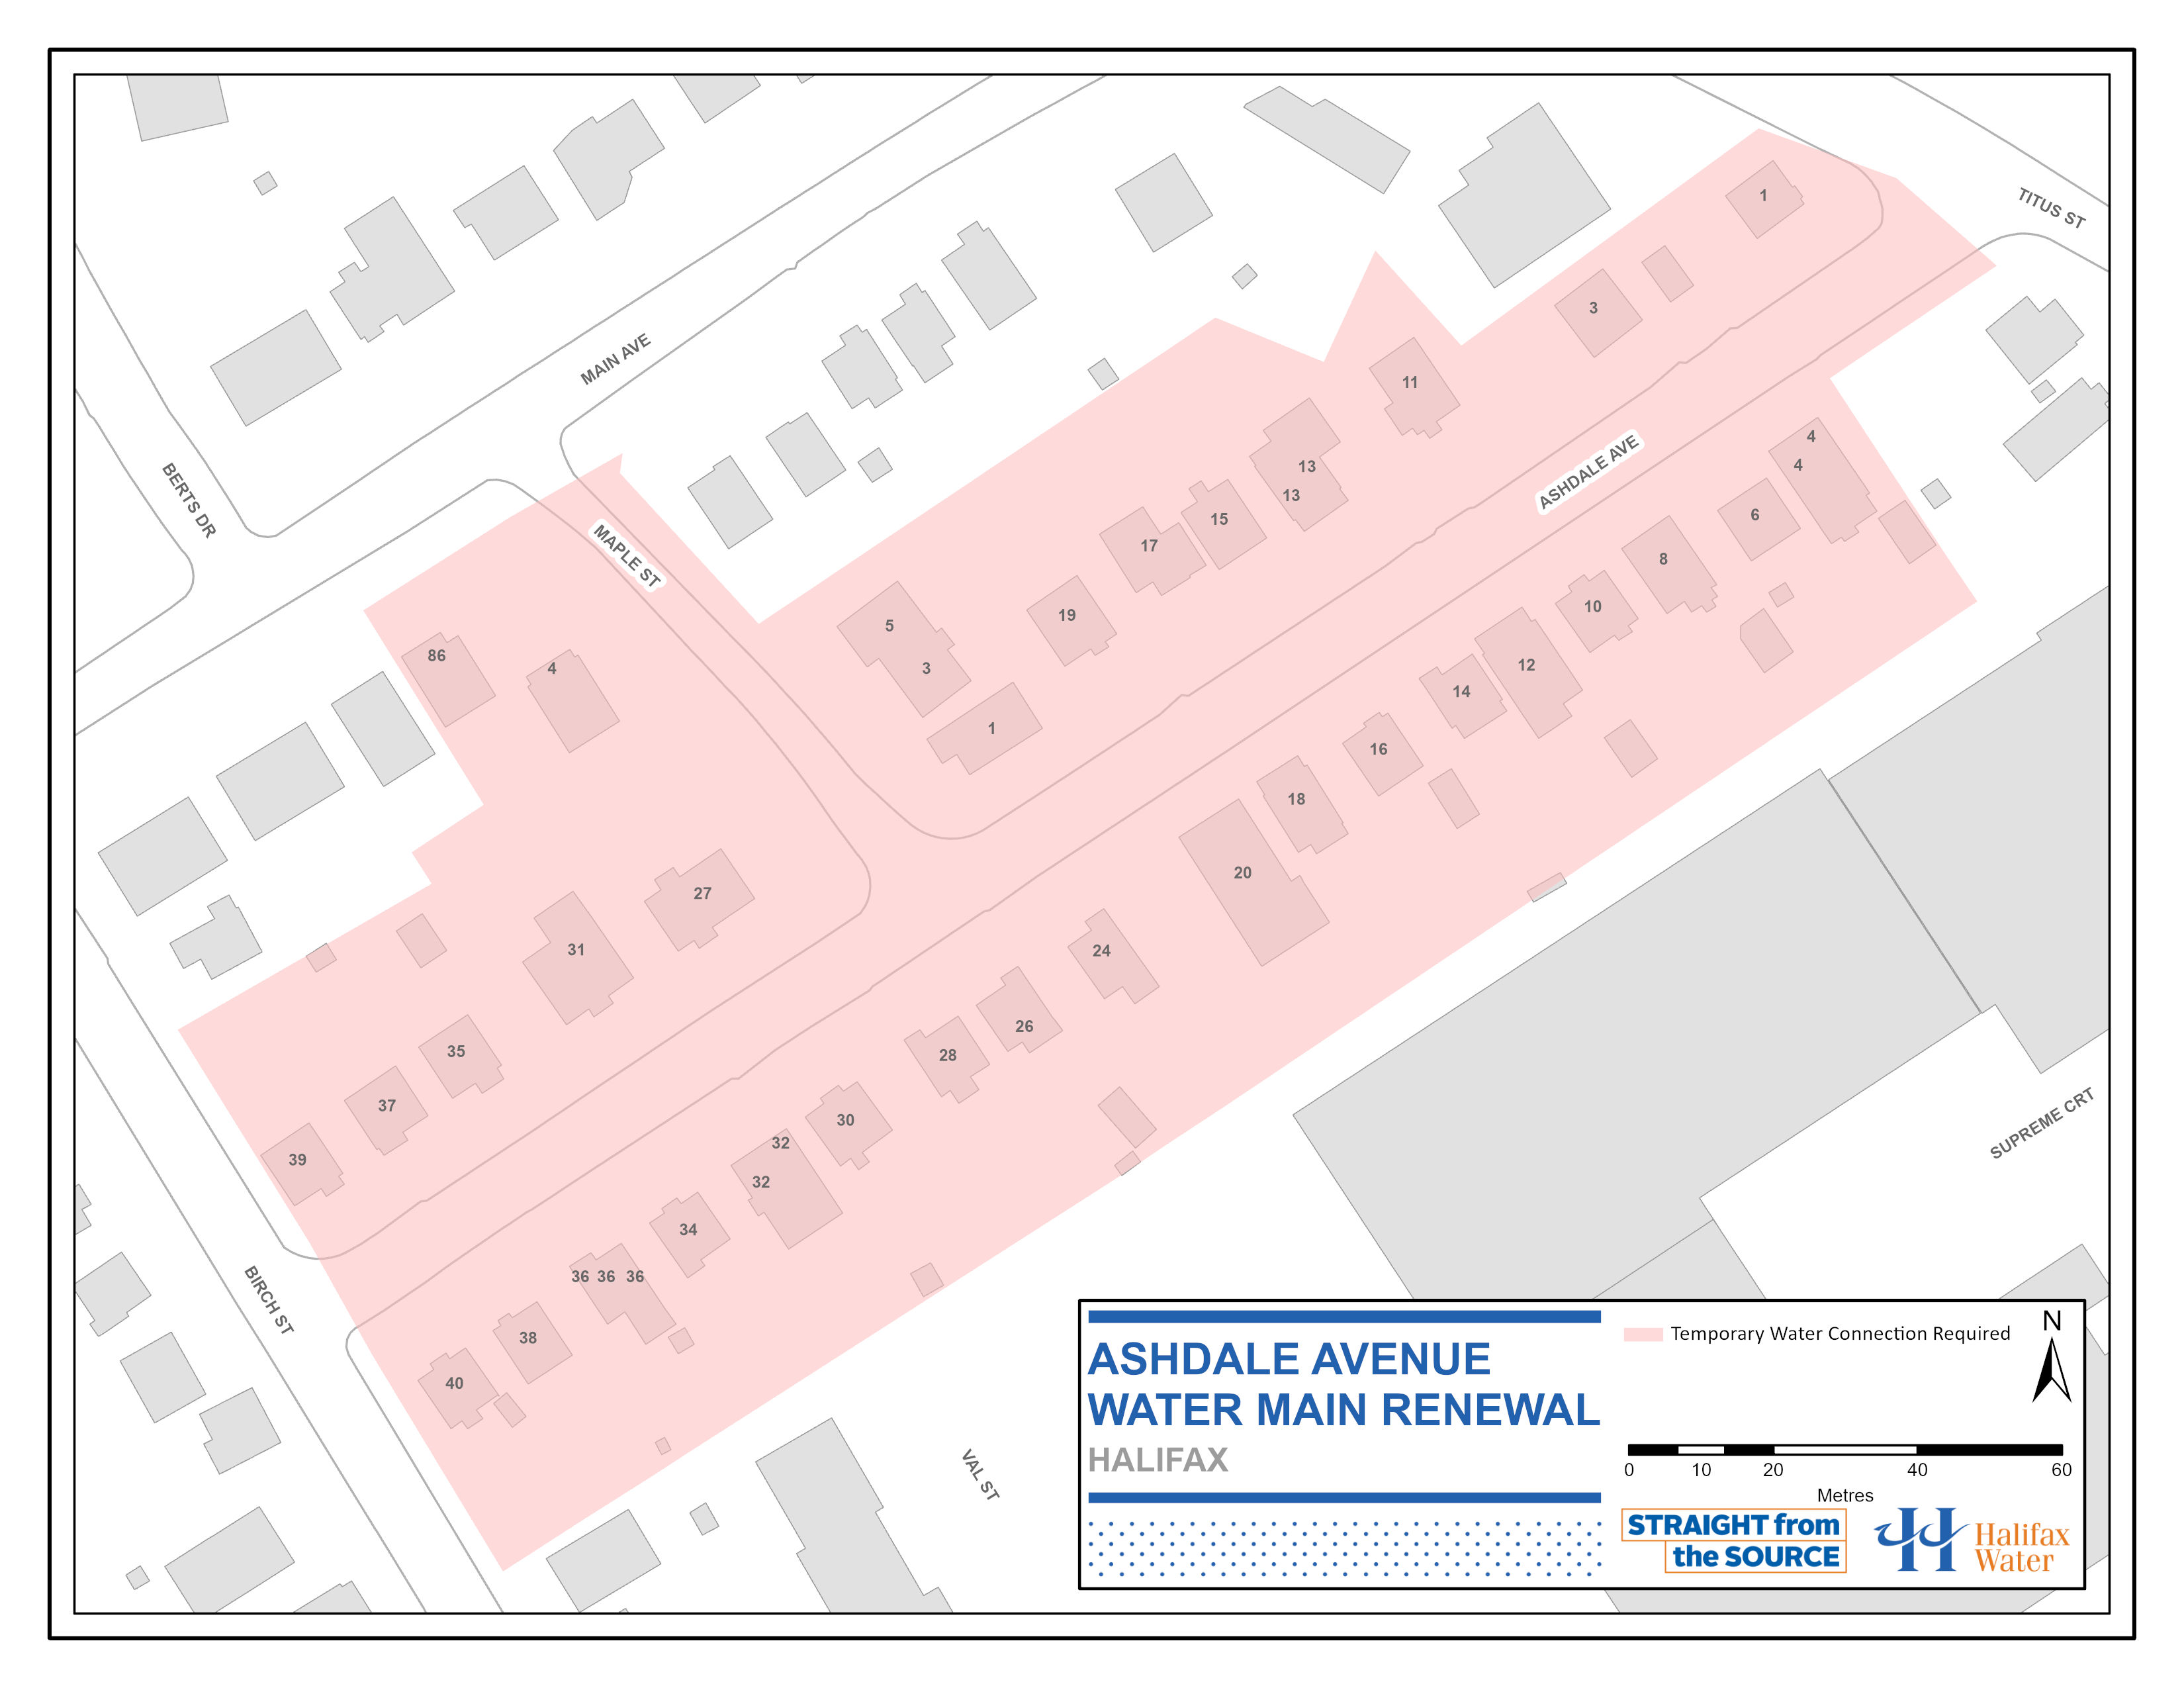 Ashdale Avenue Water Main Renewal Temporary Water Connection